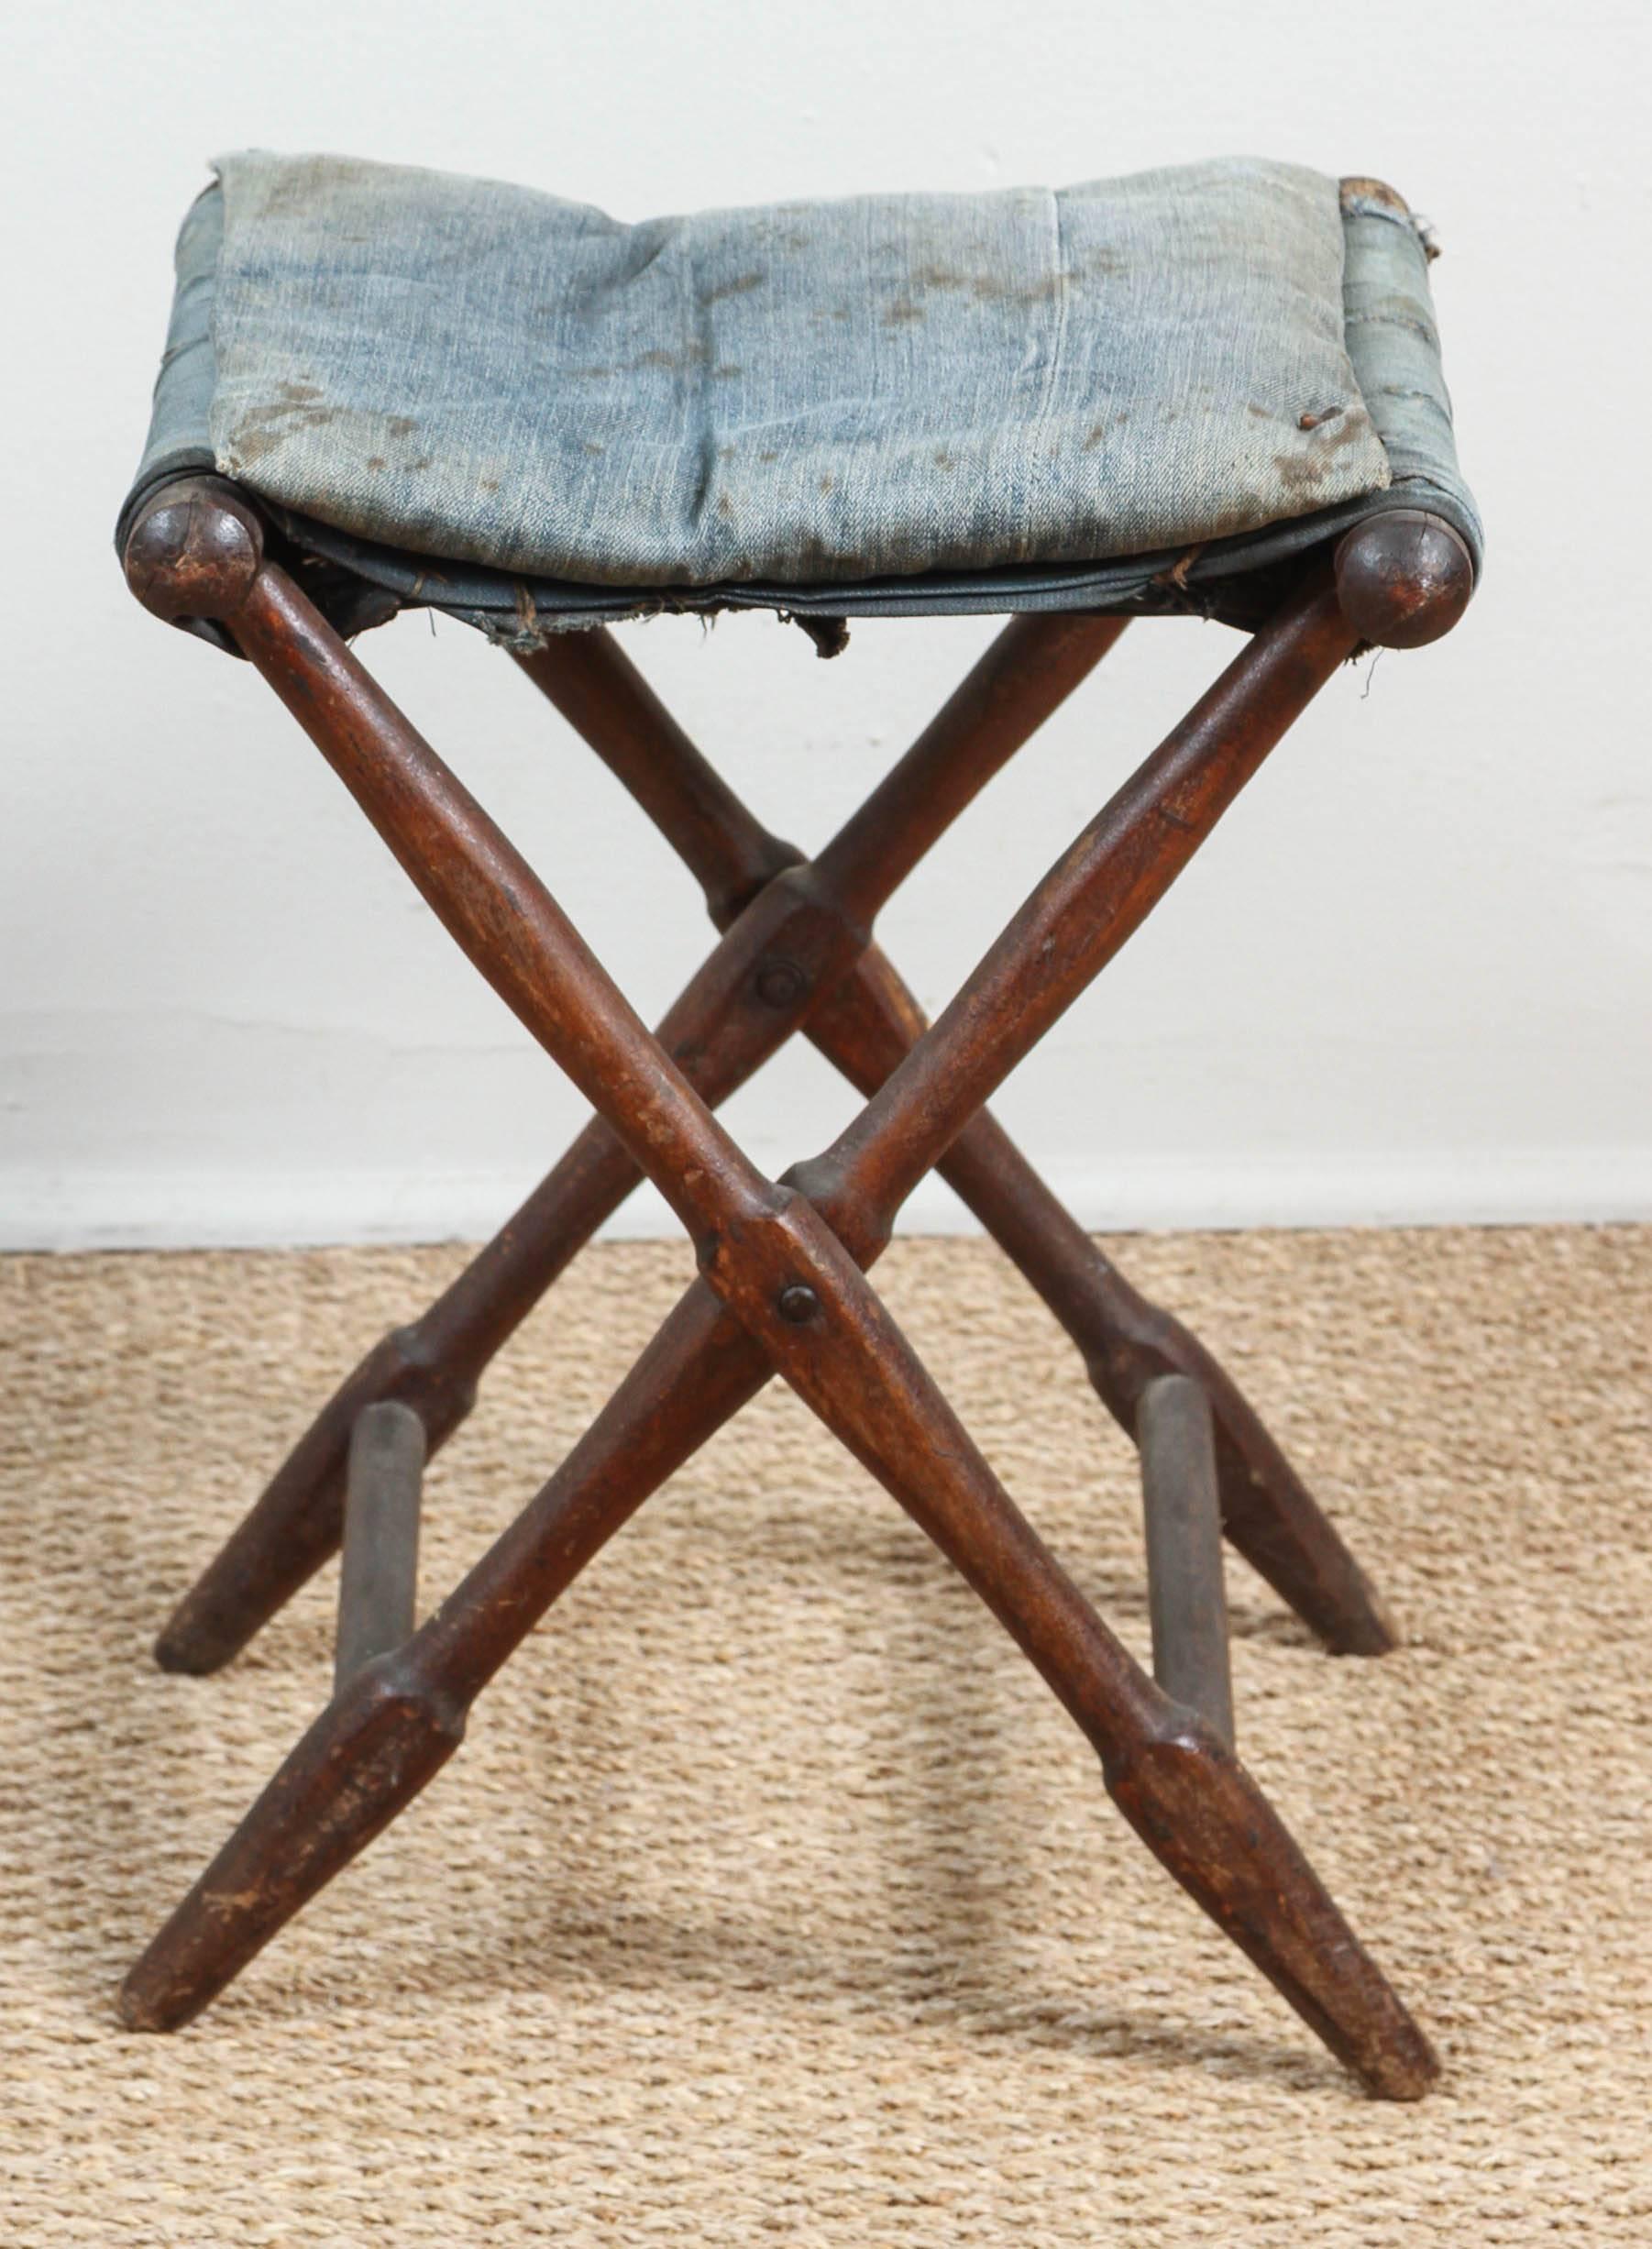 Early 20th century folding stool. Flat pillow and crosspiece made from faded but still sturdy indigo denim jeans.